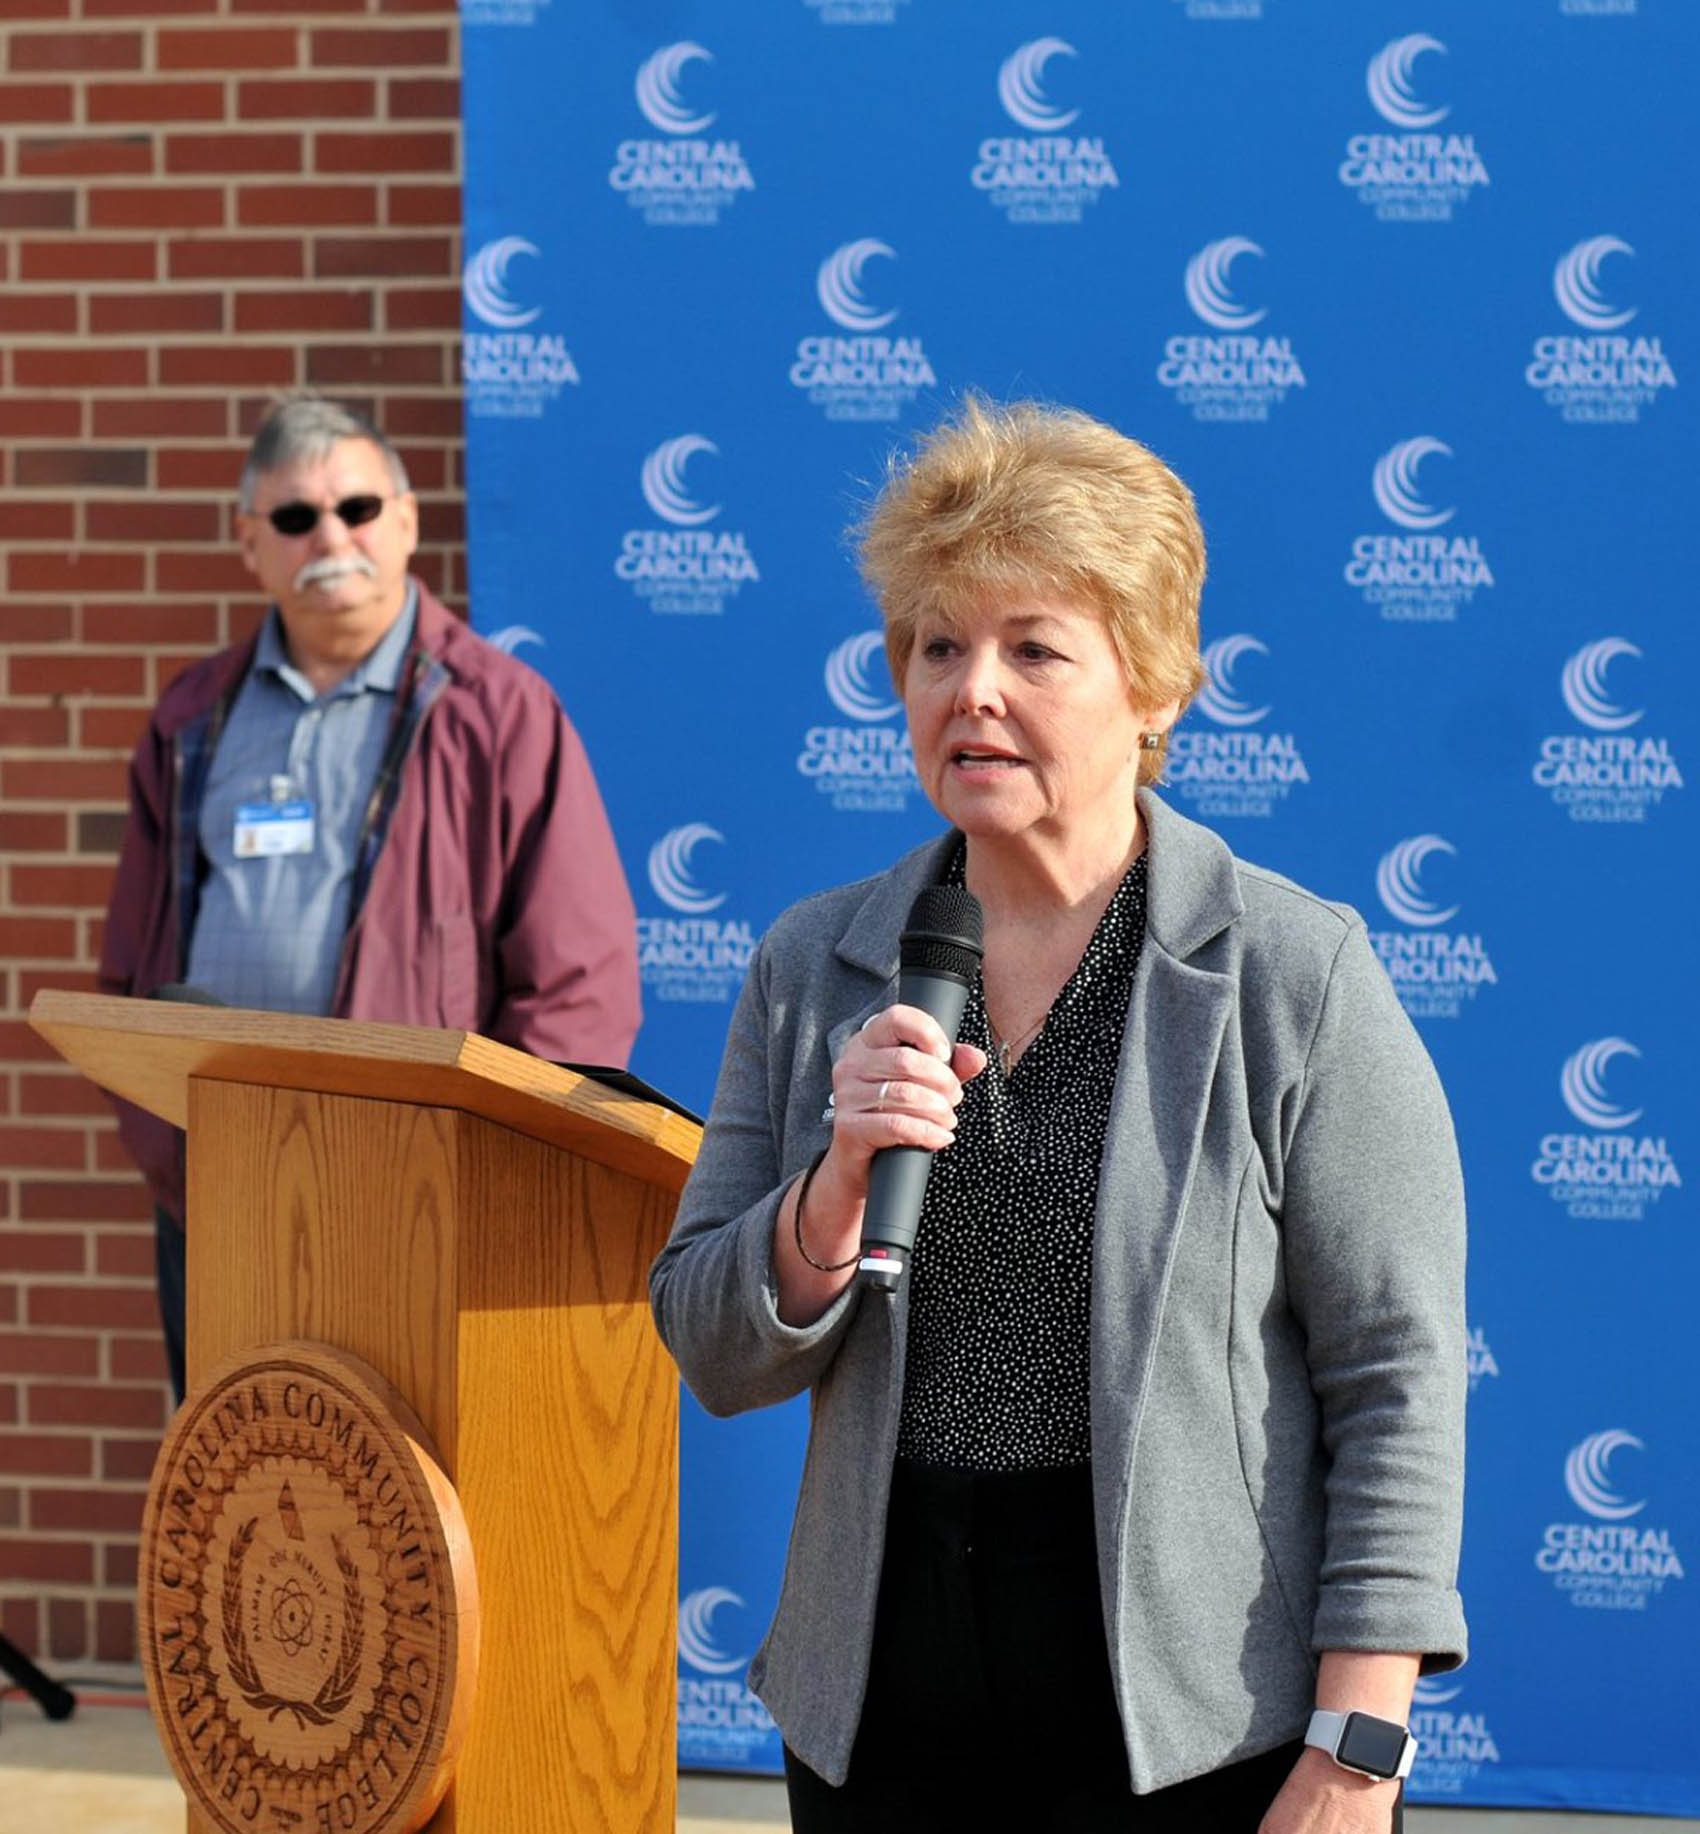 Click to enlarge,  Central Carolina Community College President Dr. Lisa M. Chapman speaks during a Veterans Day Ceremony held Monday, Nov. 11, at the CCCC Lee Main Campus in Sanford, N.C. 